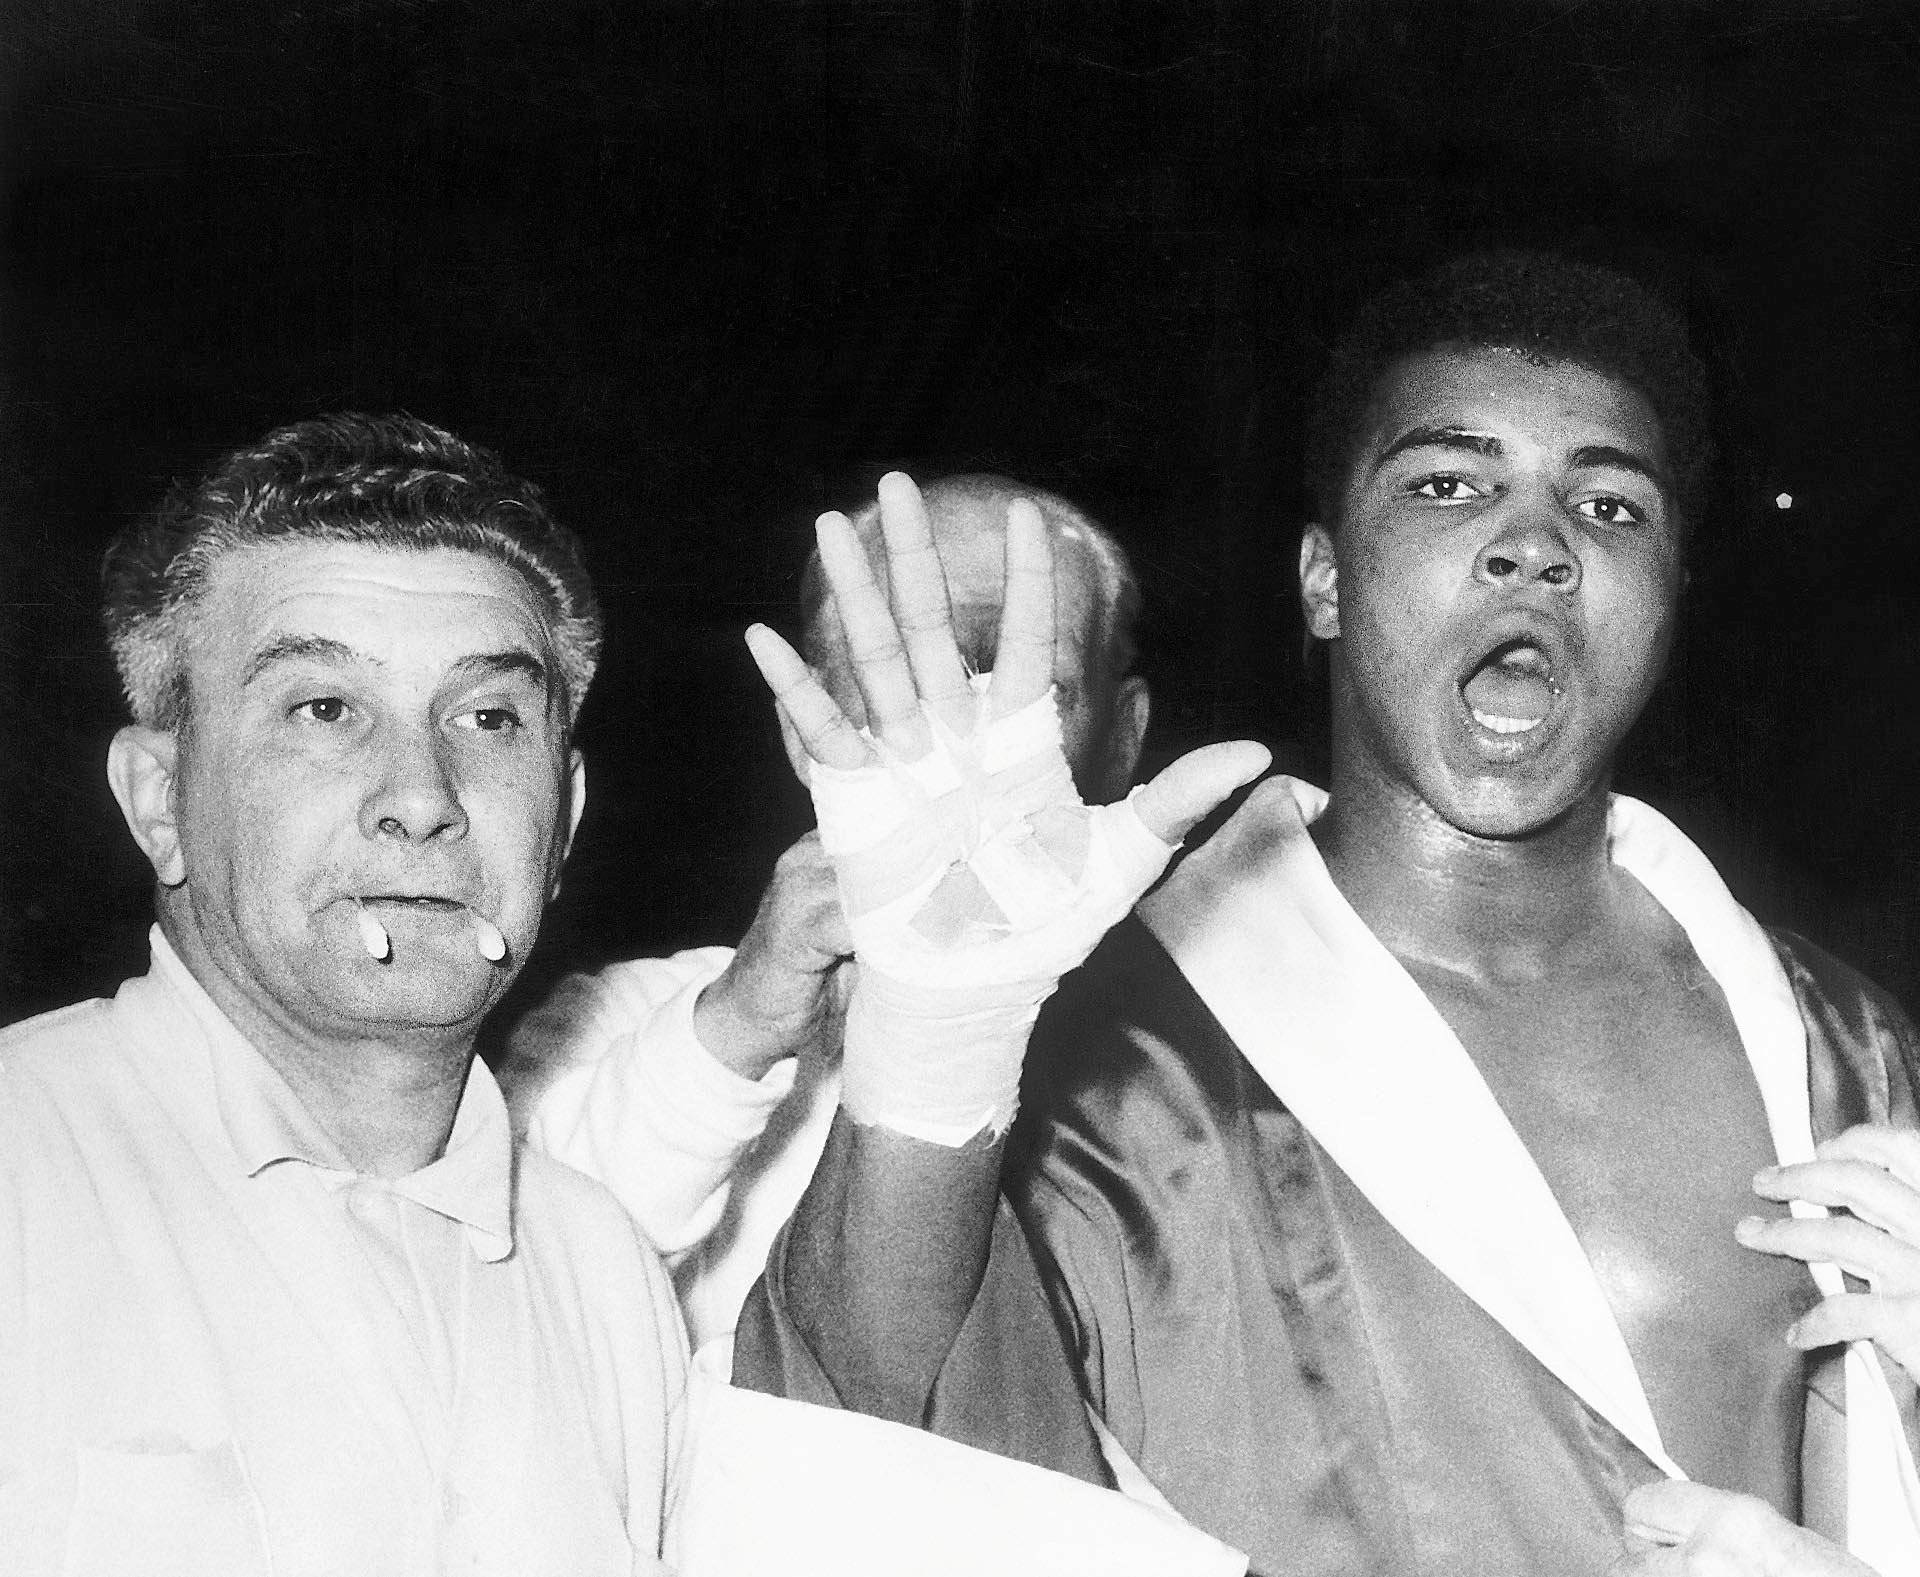  Cassius Clay (later Muhammad Ali) predicts that he will in the fifth round before his fight with Henry Cooper at Wembley Stadium in London